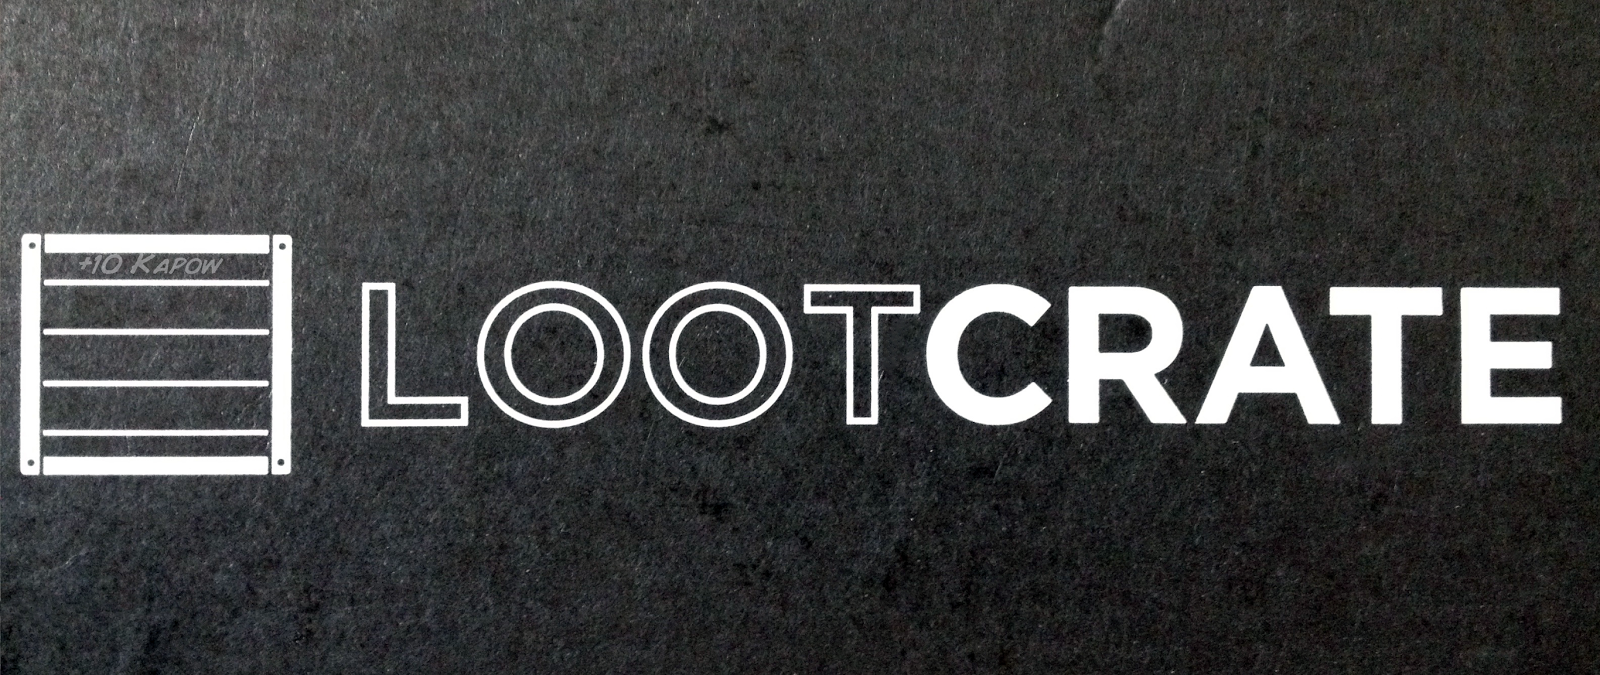 Lootcrate Unboxing: February 2015 “Play”